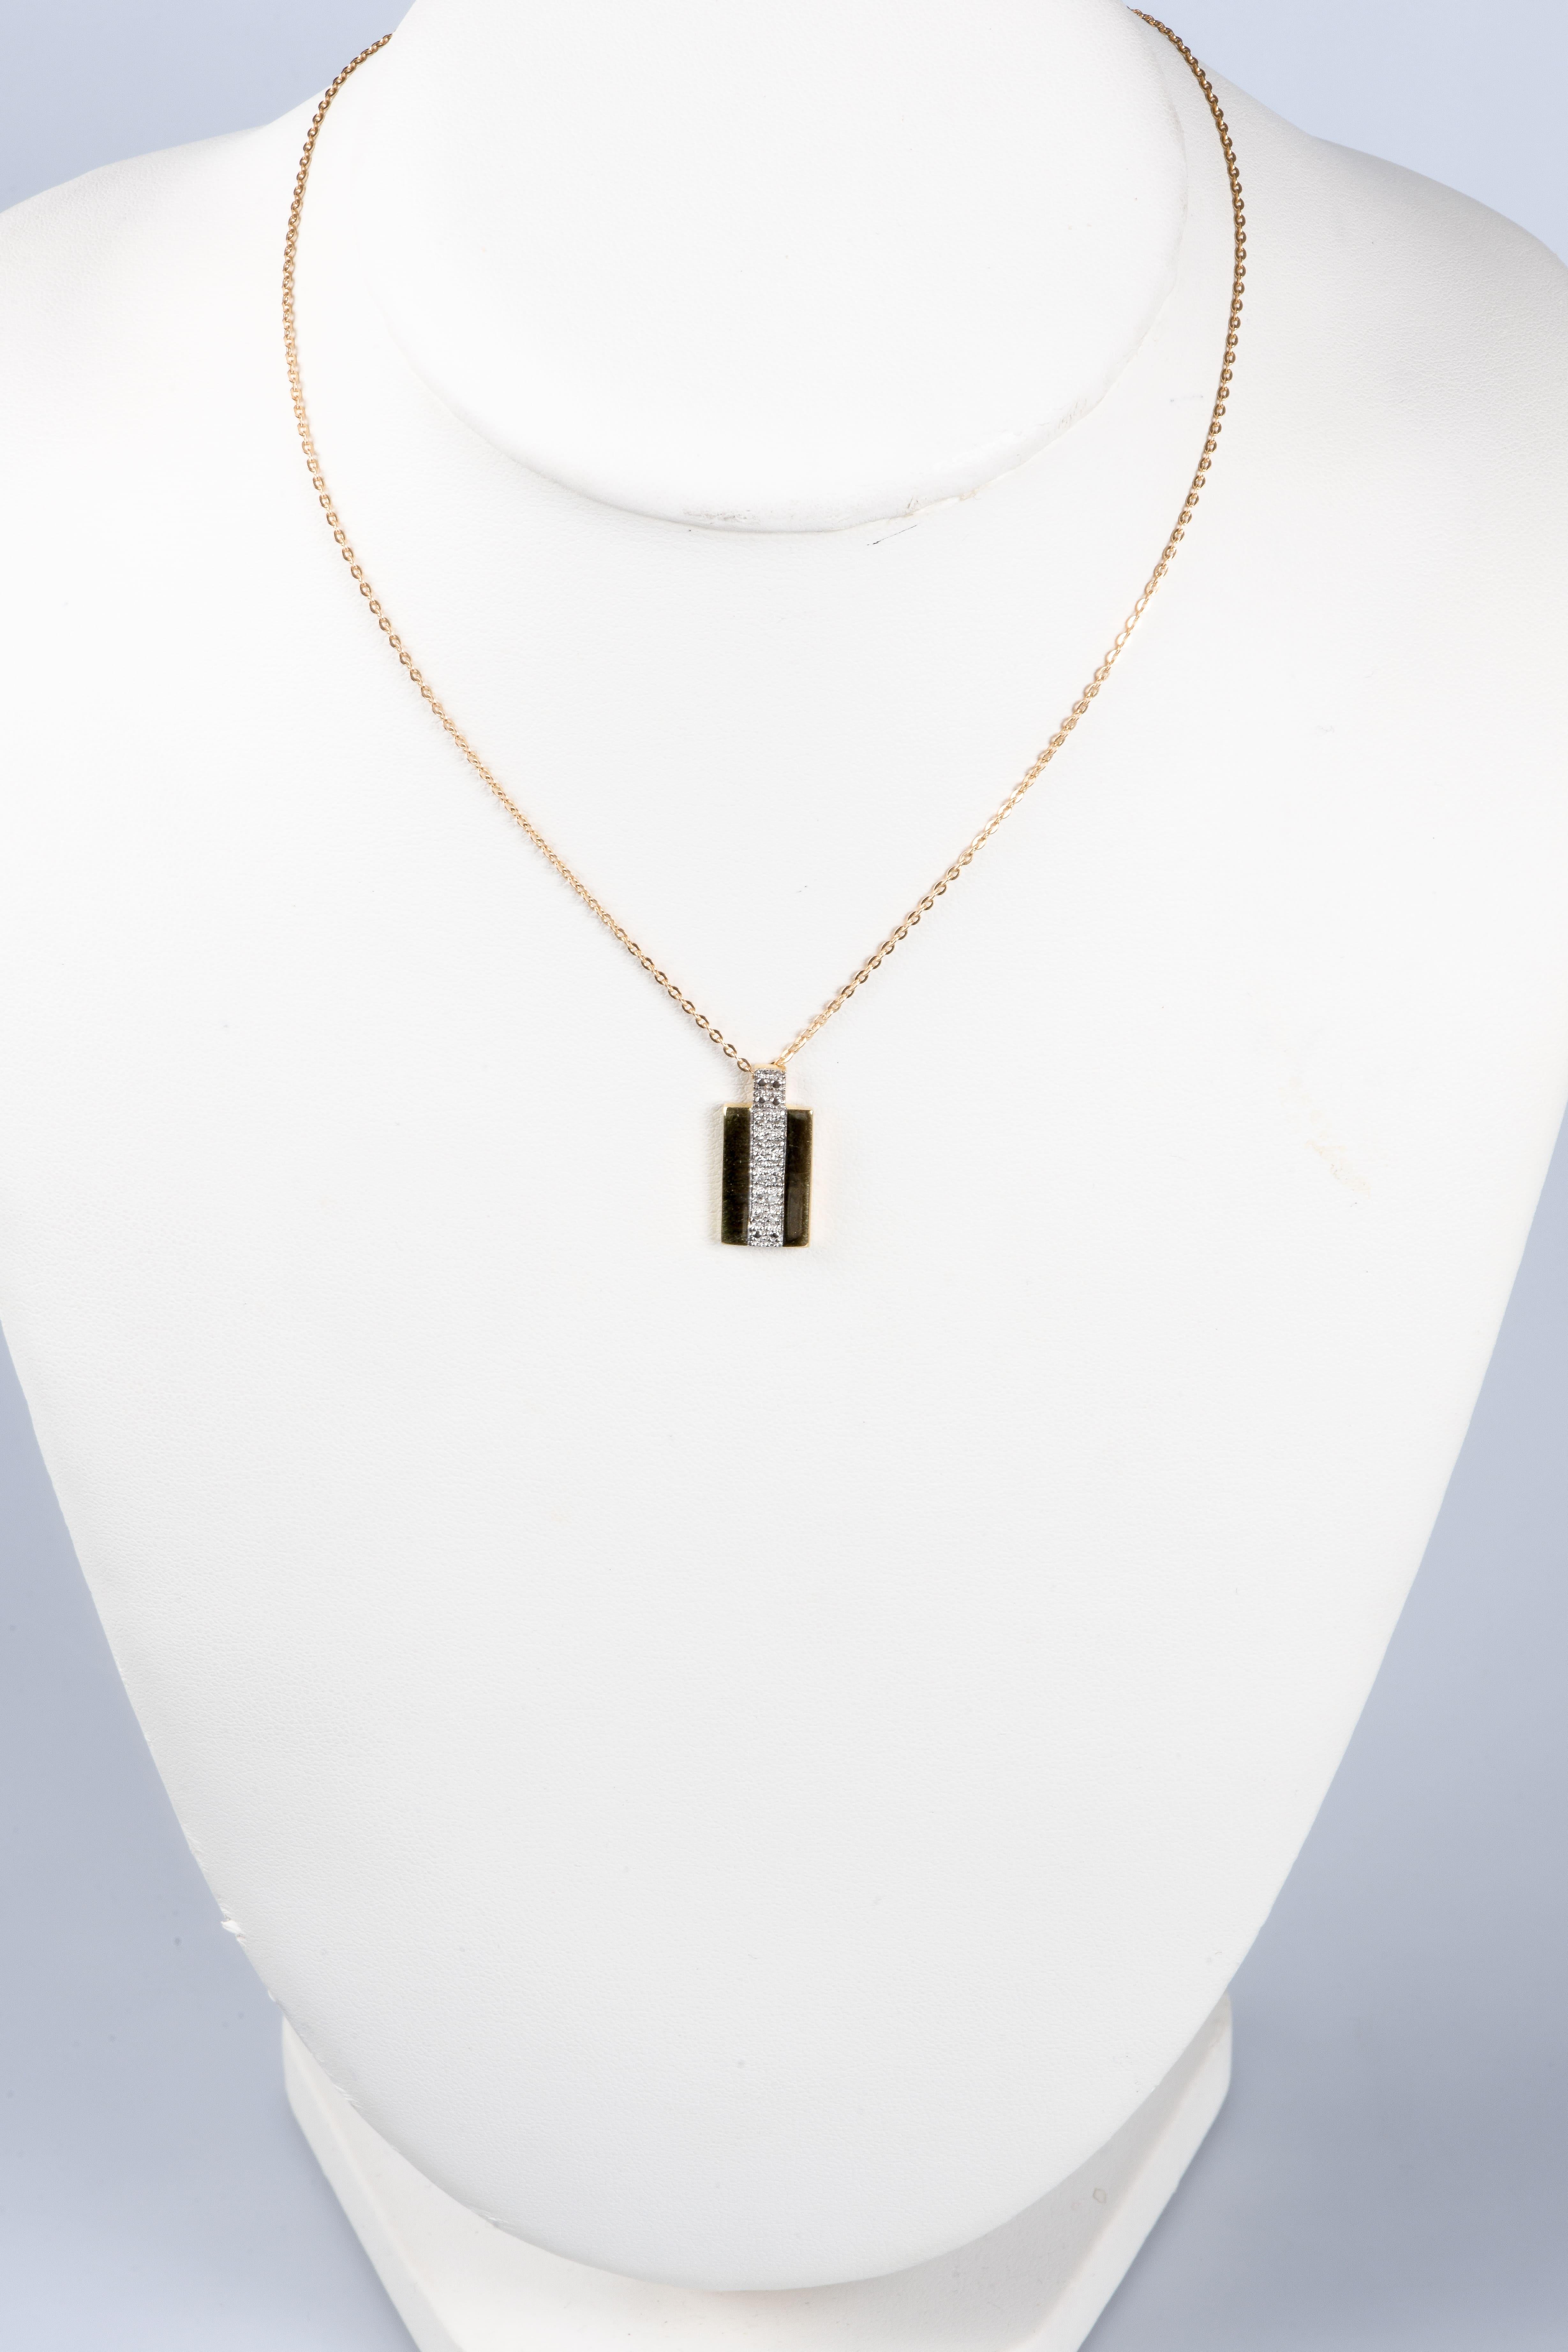 A necklace composed of a chain in 18-carat yellow gold and a rectangular pendant in 18-carat yellow gold decorated with 12 brilliant round cut diamonds of 0.01 carats each, or 0.12 carats in total. Very elegant, this pendant brings a touch of light